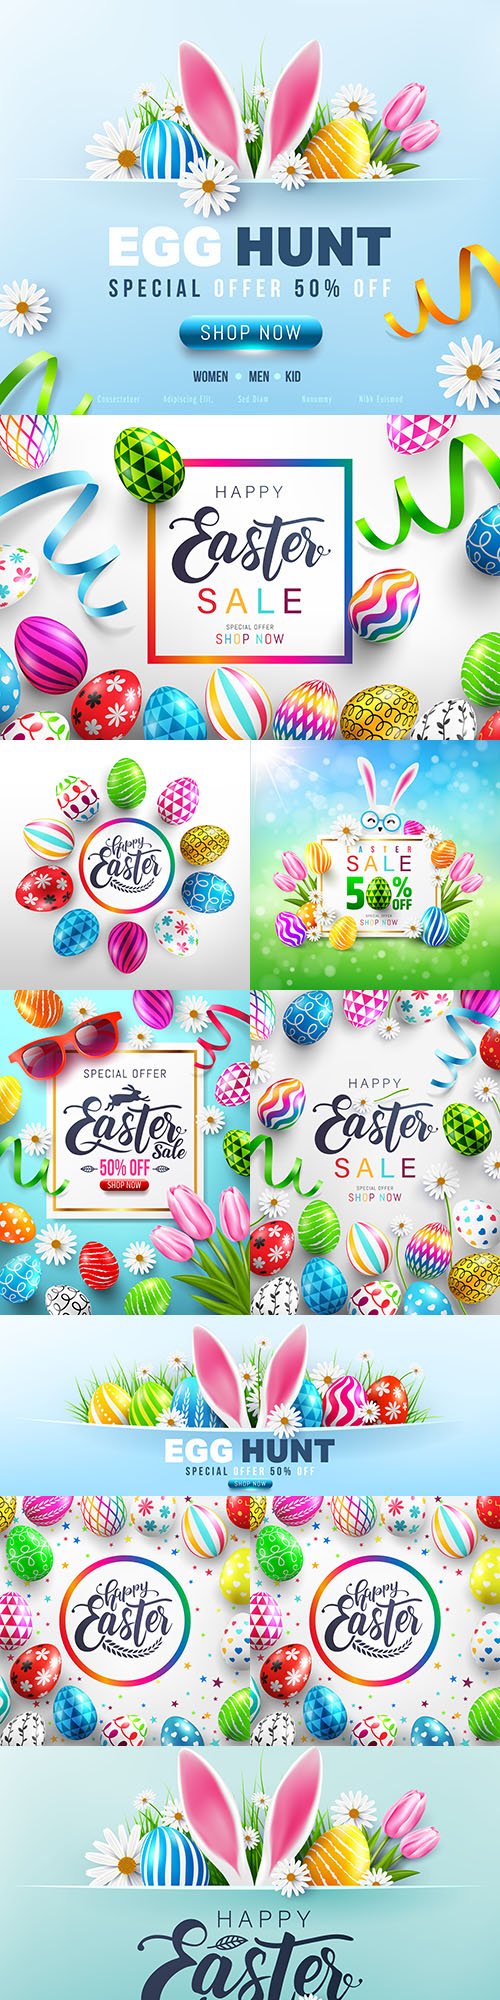 Easter eggs and flower sale banner template